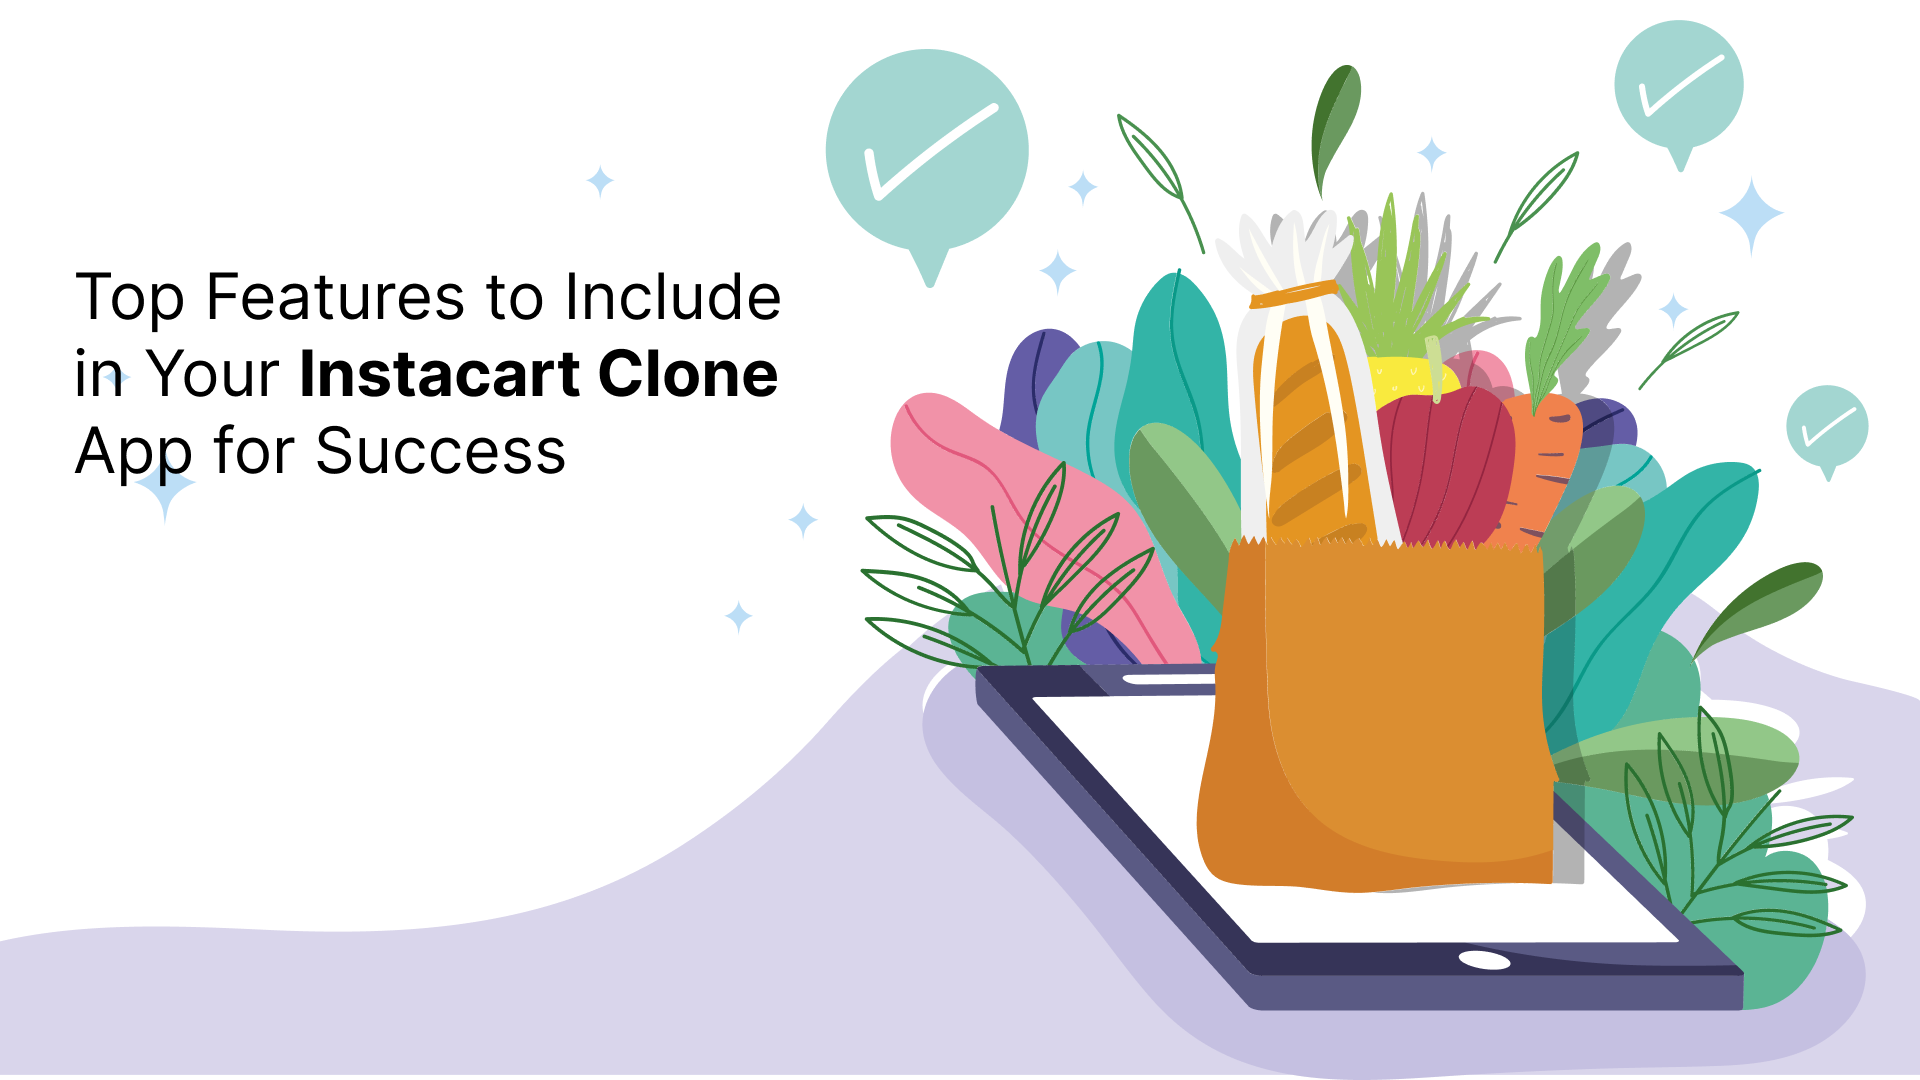 Top Features to Include
in Your Instacart Clone
App for Success